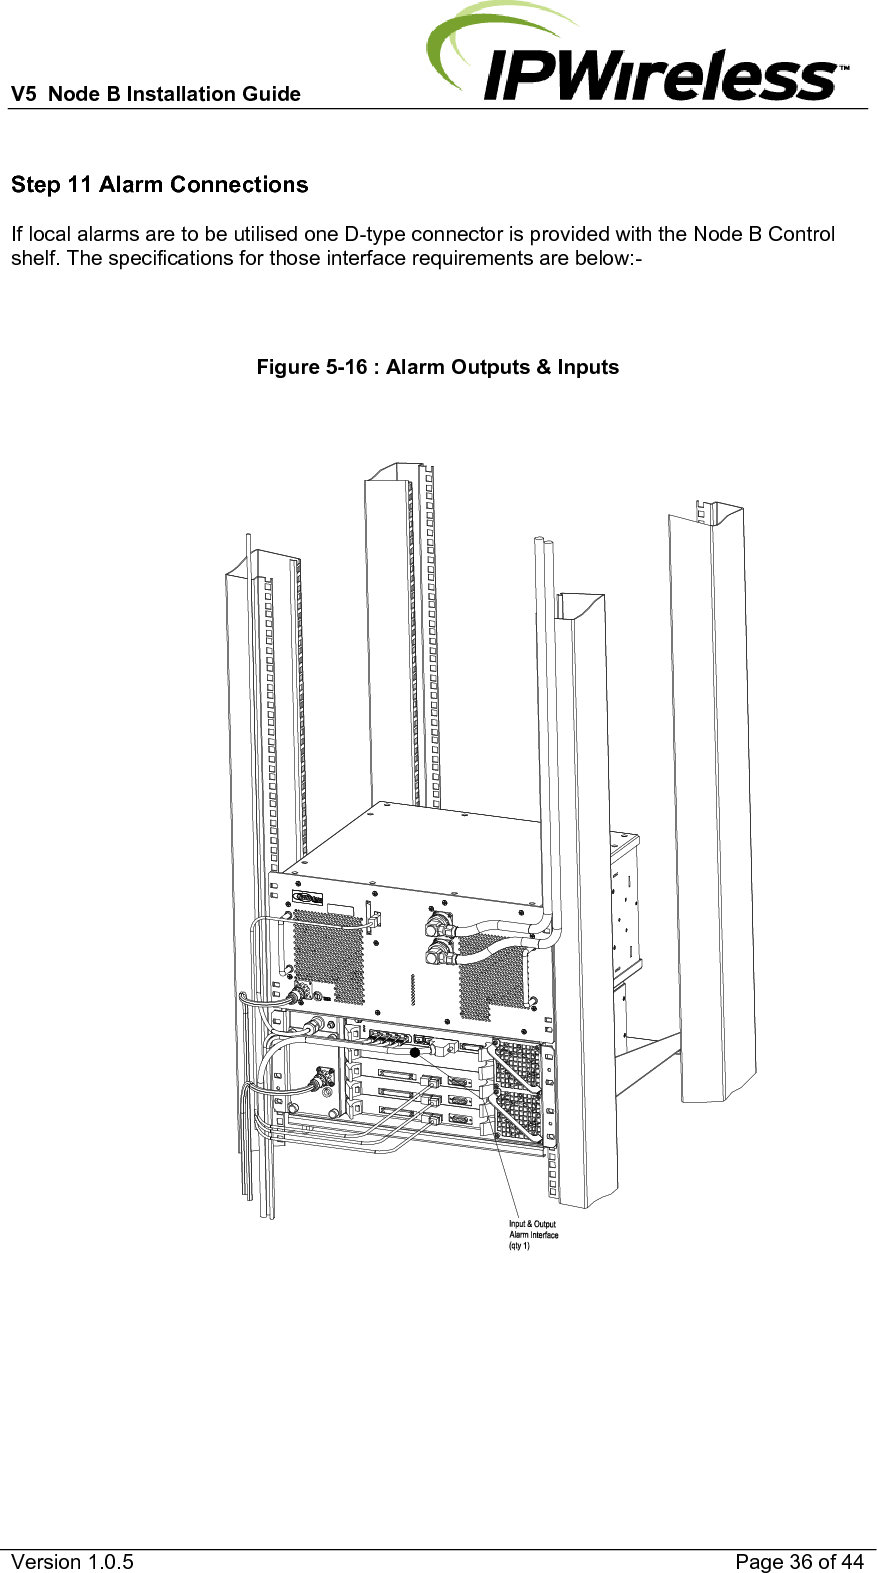 V5  Node B Installation Guide                           Version 1.0.5    Page 36 of 44  Step 11 Alarm Connections If local alarms are to be utilised one D-type connector is provided with the Node B Control shelf. The specifications for those interface requirements are below:-    Figure 5-16 : Alarm Outputs &amp; Inputs   